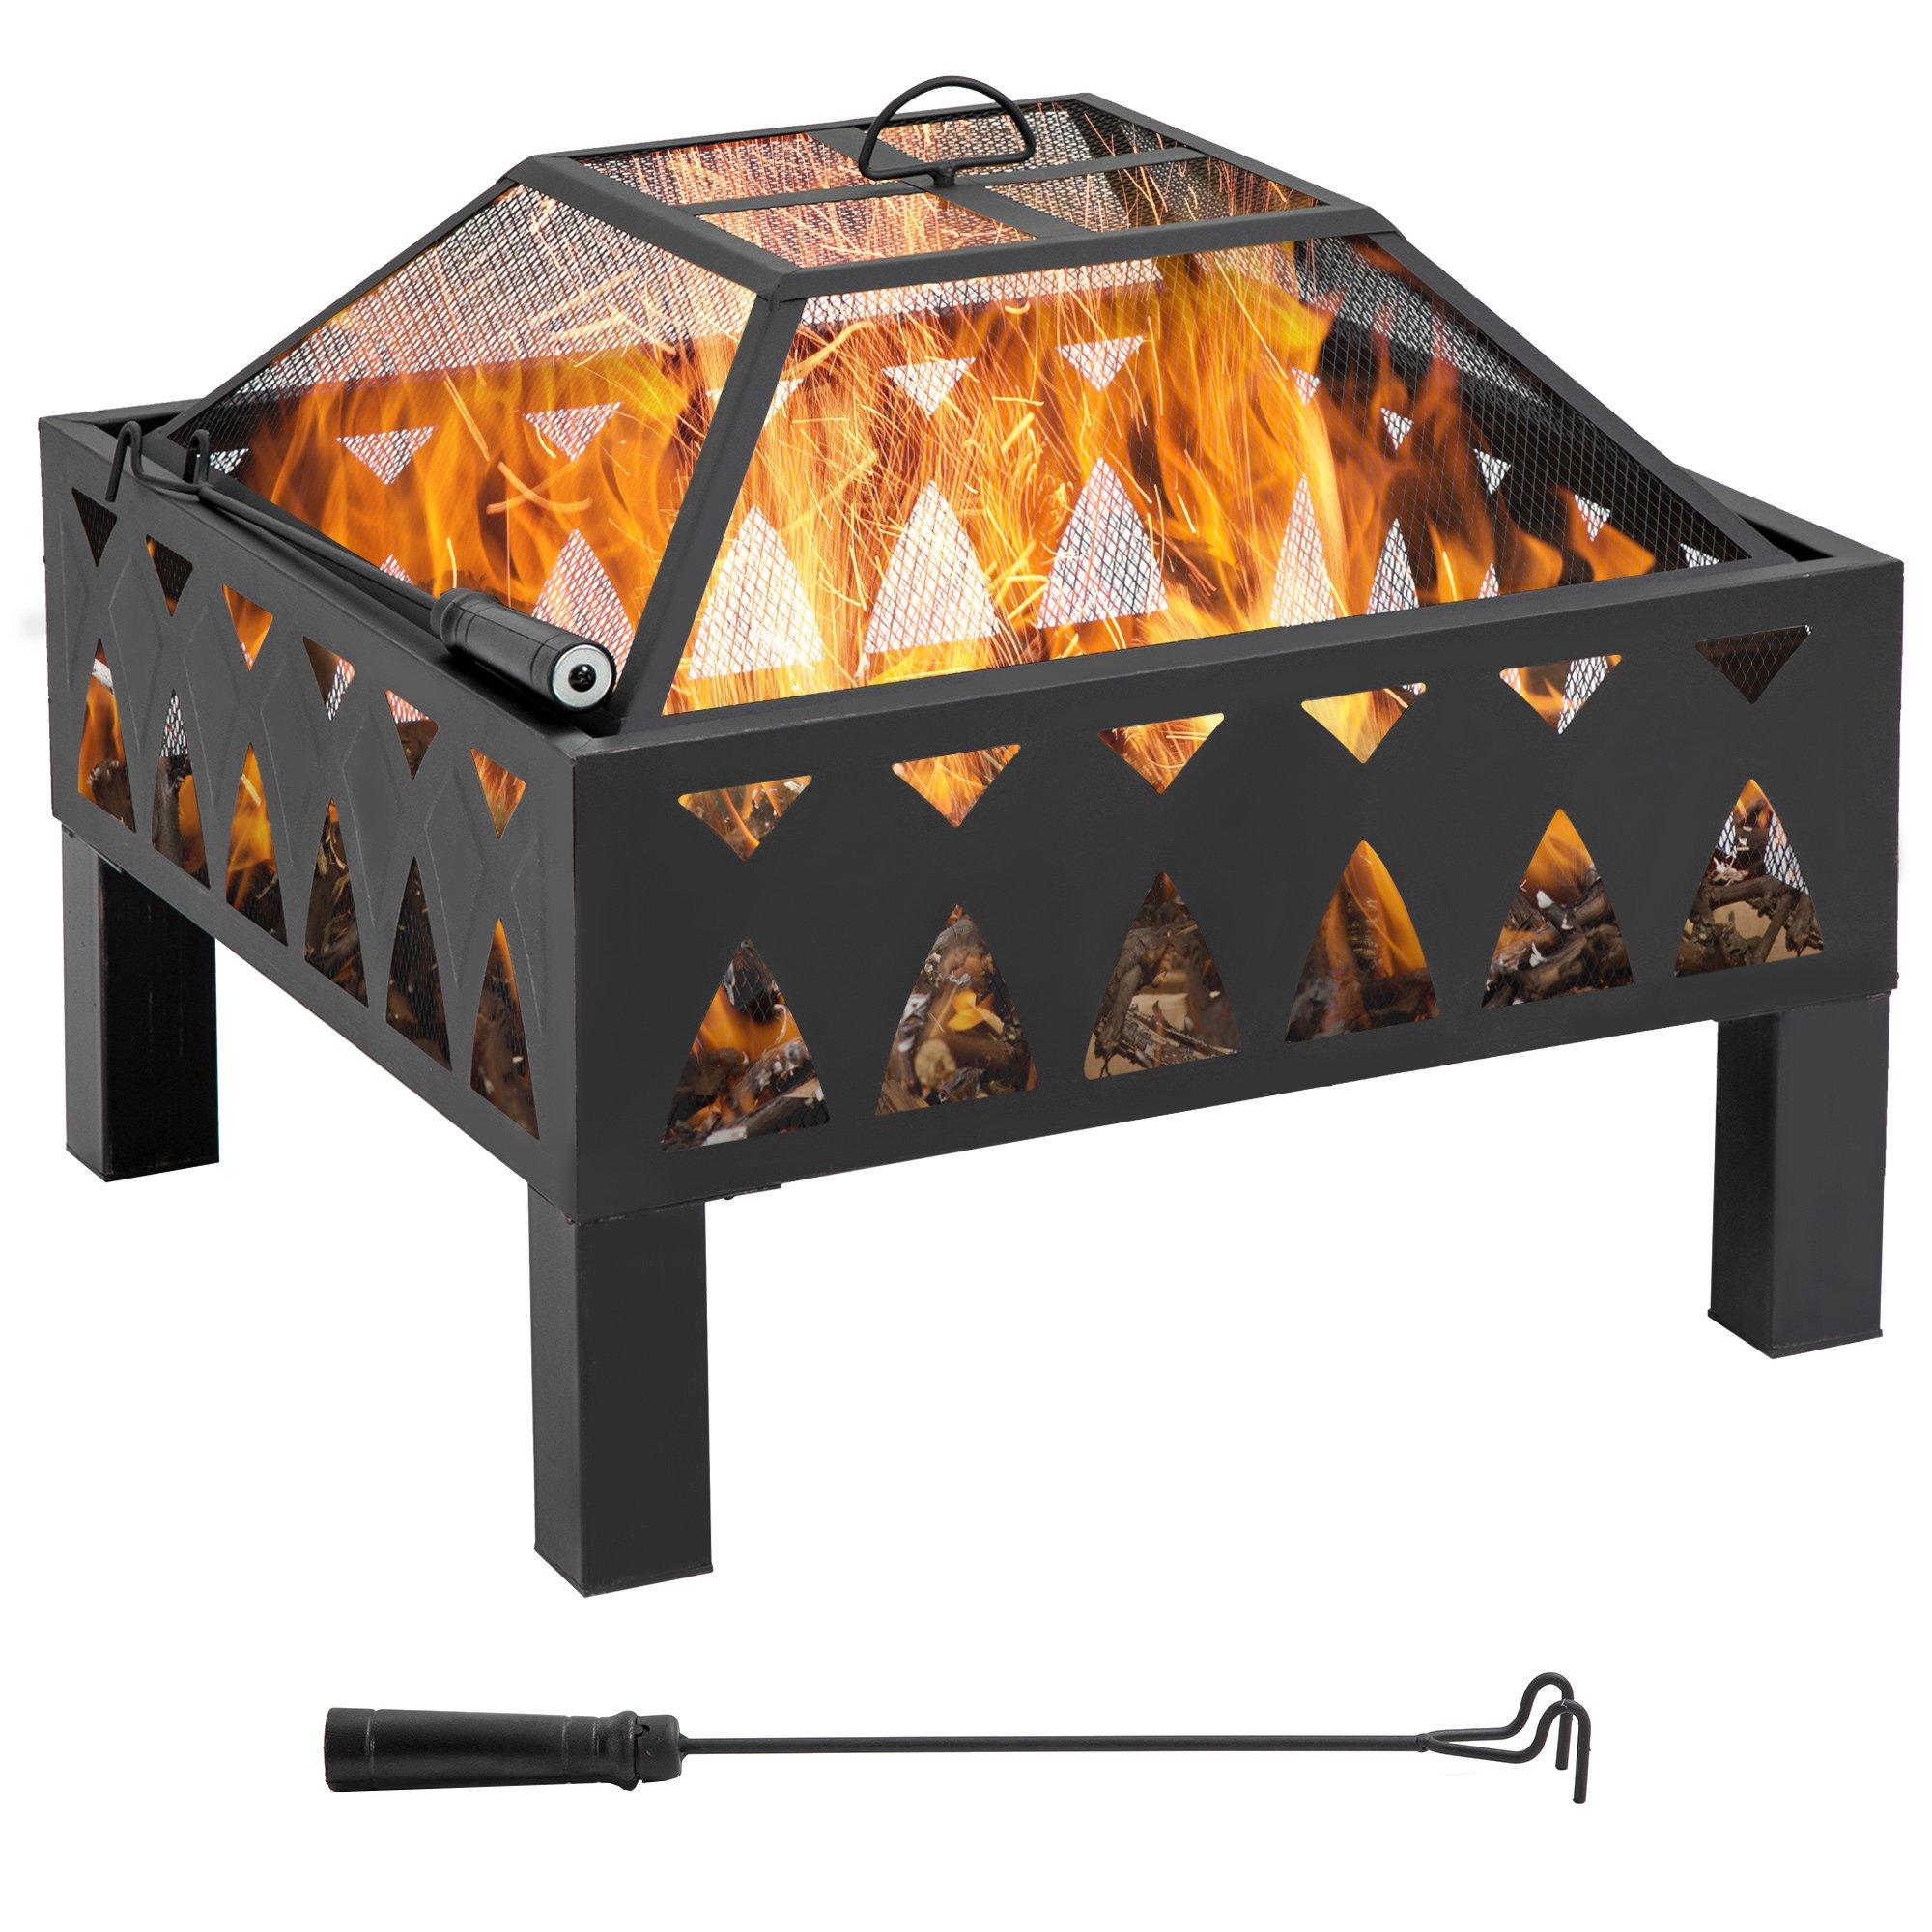 Outdoor Fire Pit with Screen and Poker, Backyard Wood Burner